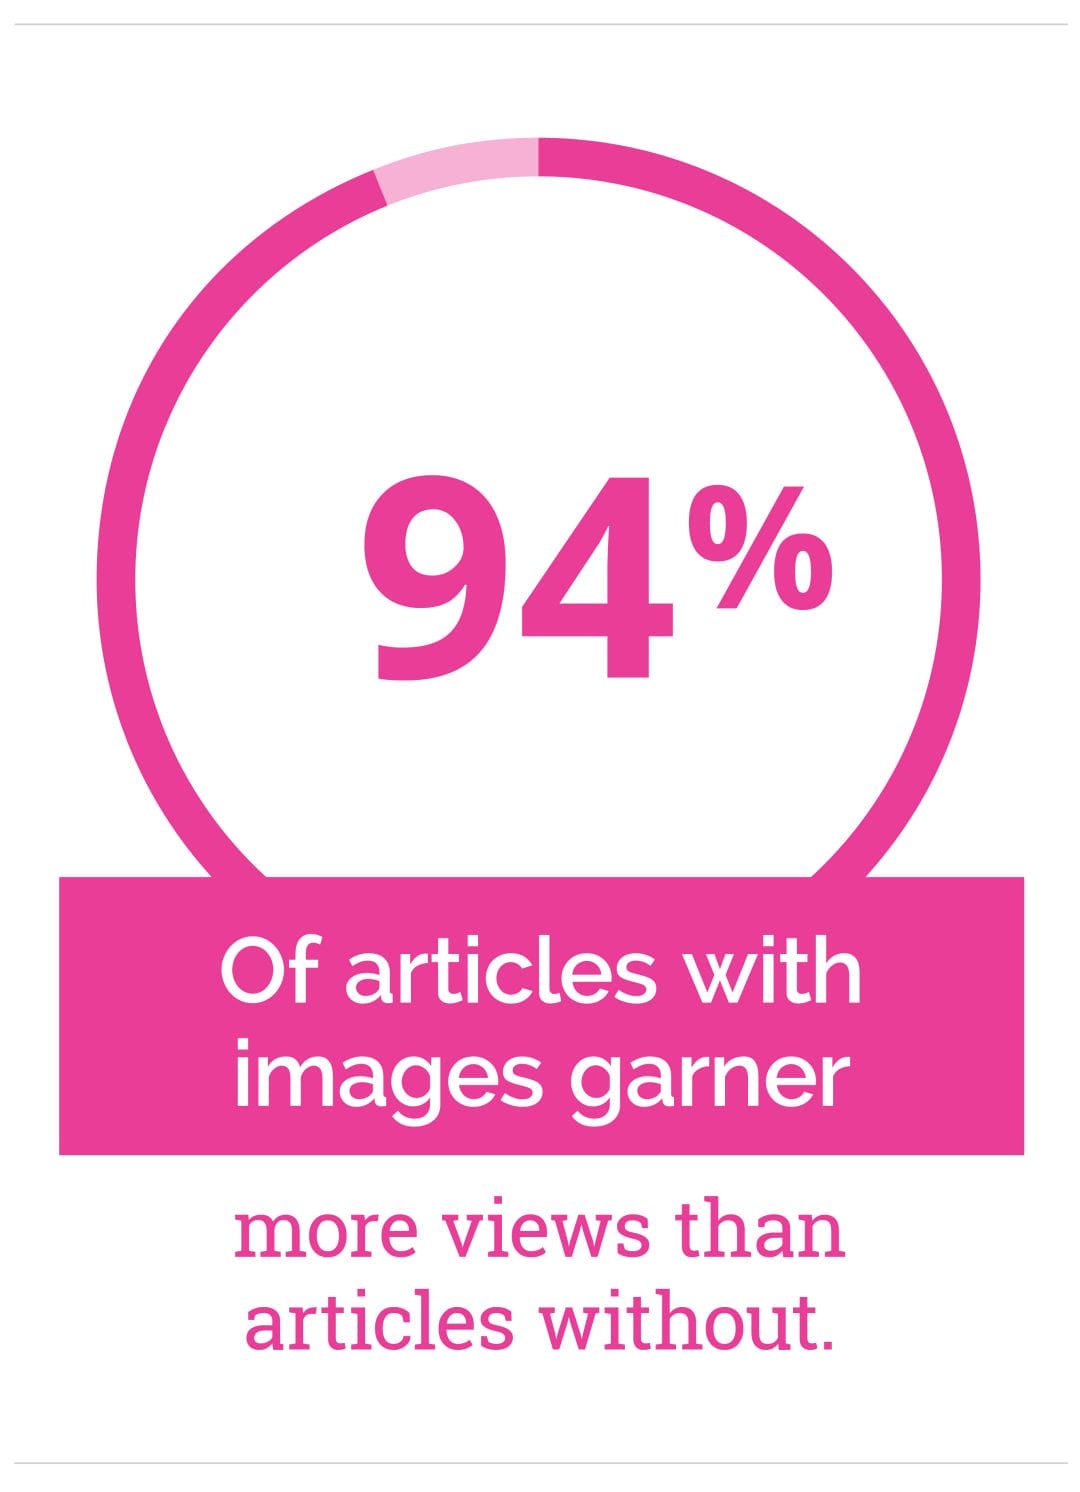 Mobile: Writing Website Content, 94% of articles with images get more views